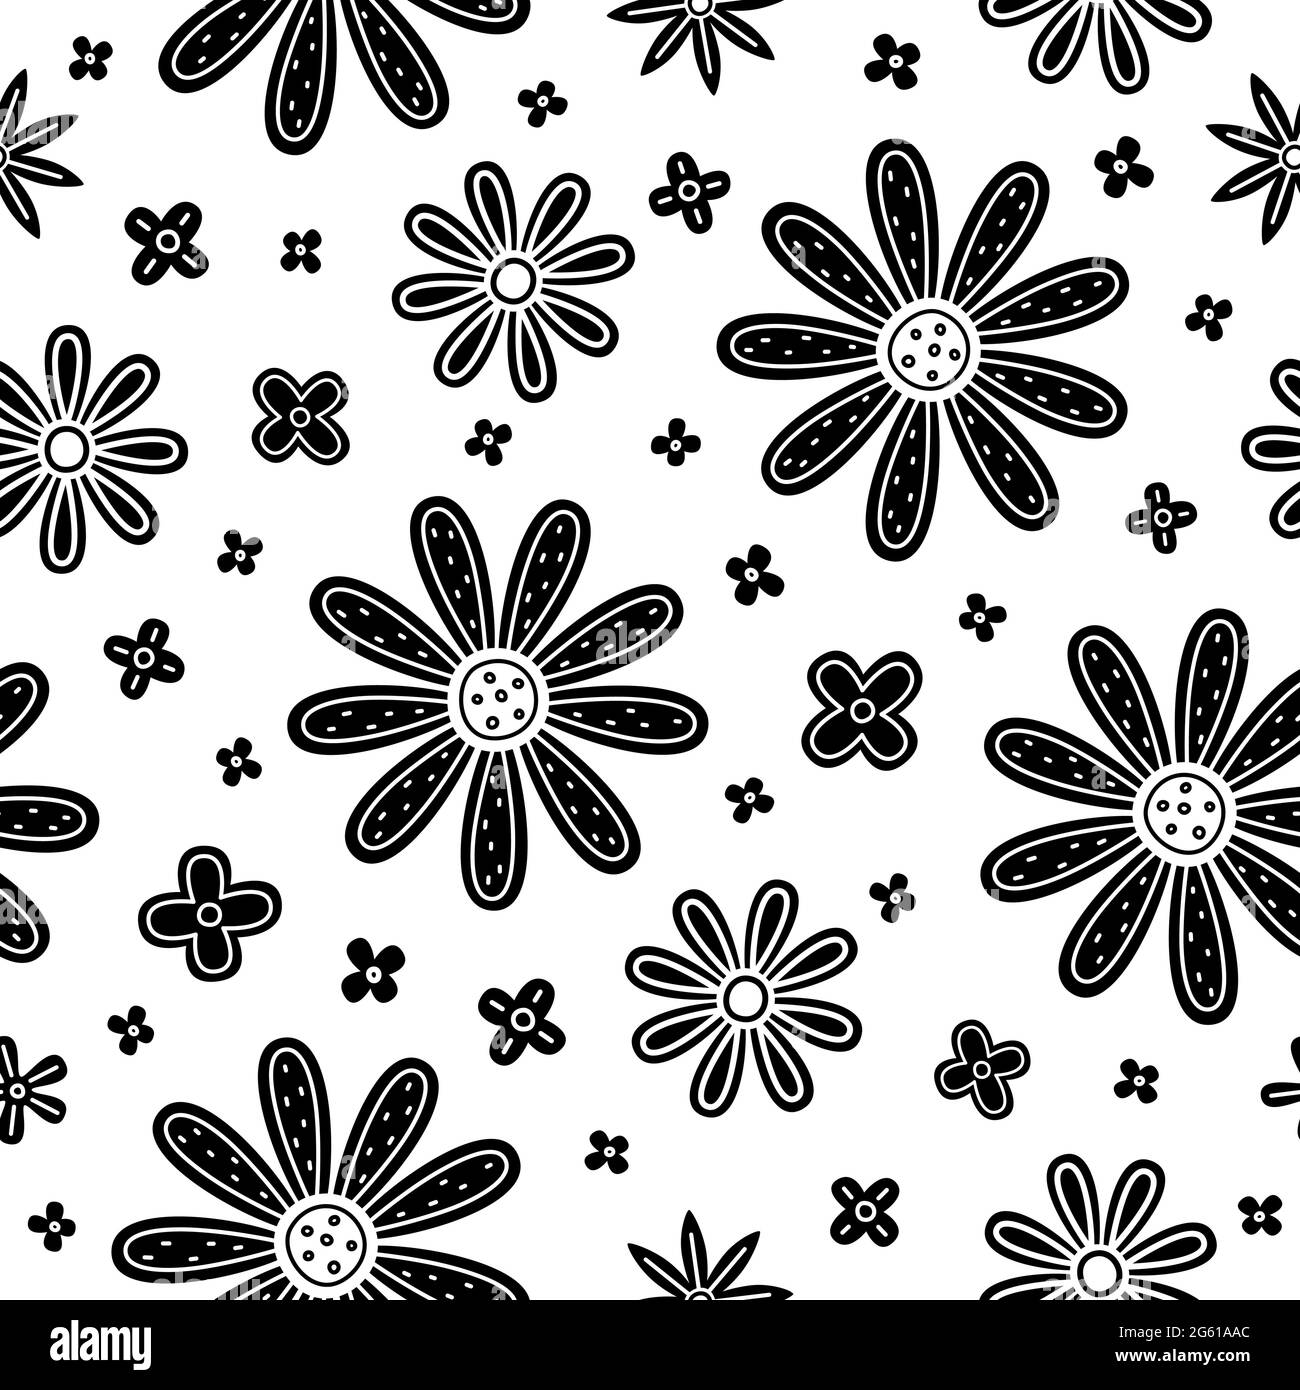 Black flowers Stock Vector Images - Alamy